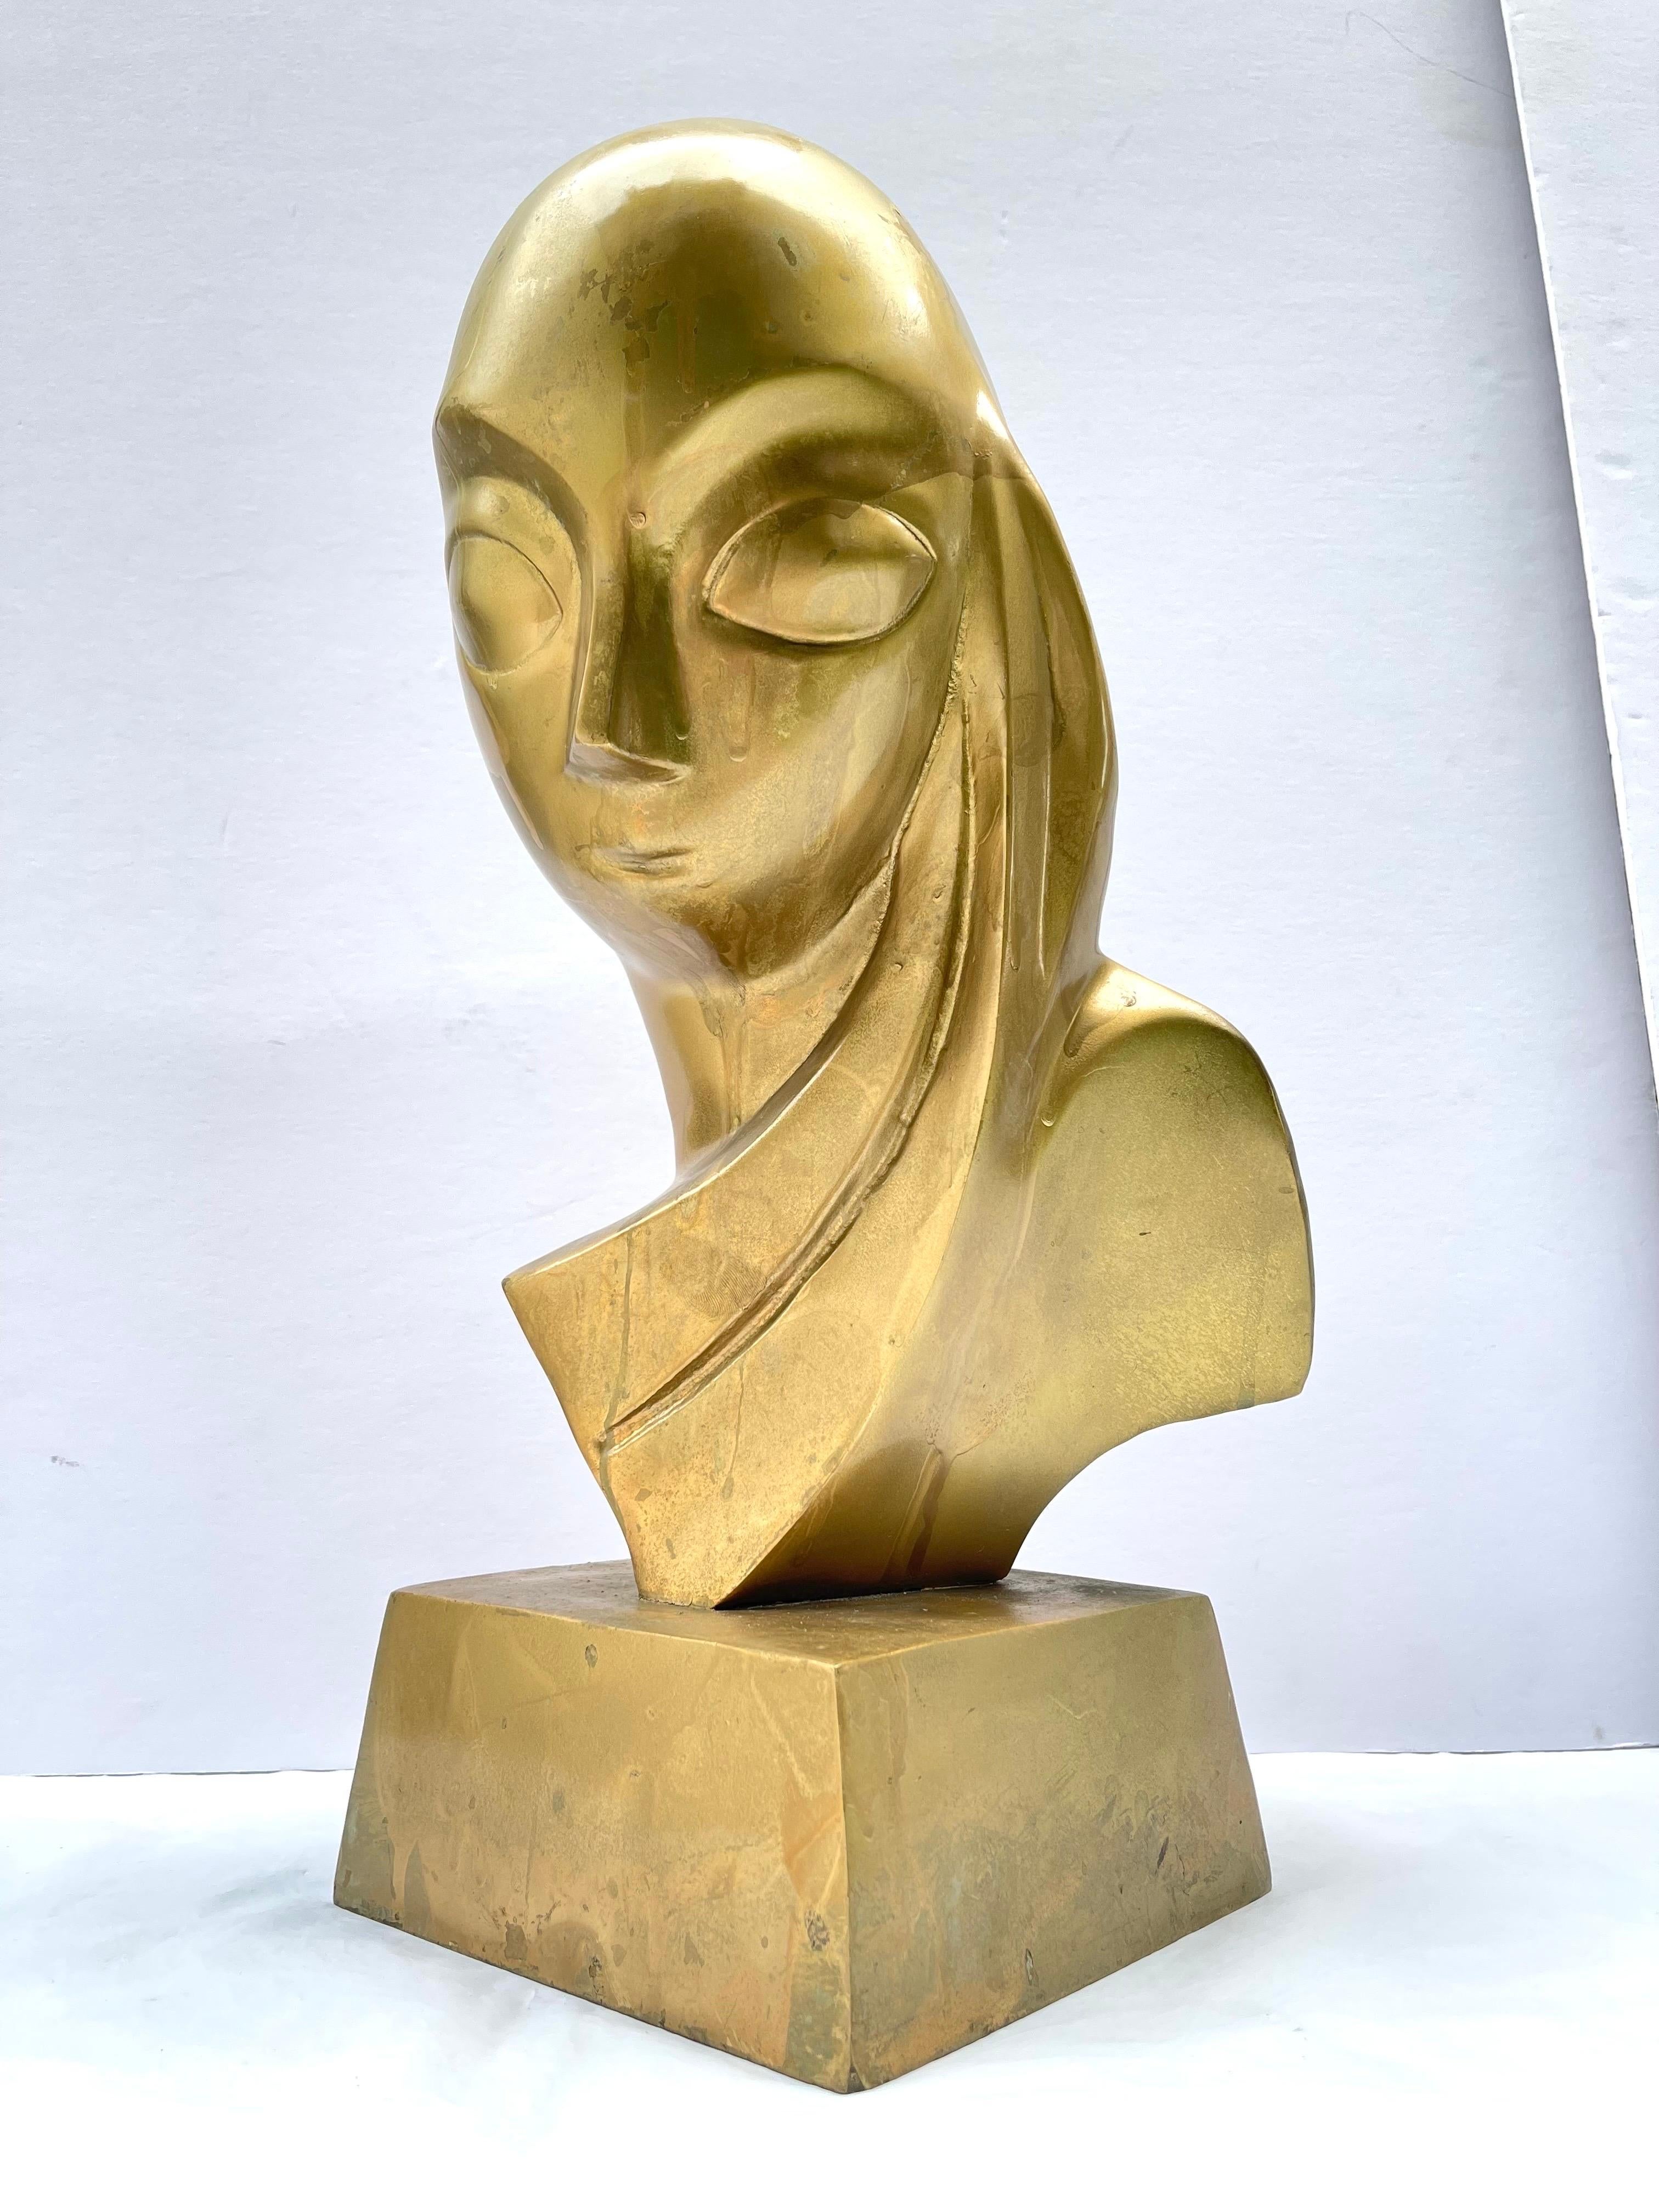 Modernist Brass sculpture of a Woman in the style of Brancusi. 
We believe this to be a reproduction in the style of the original Brancusi in the Museum of Modern Art in NYC, circa 1970's. 
Mlle Pogany is a portrait of Margit Pogany, a Hungarian